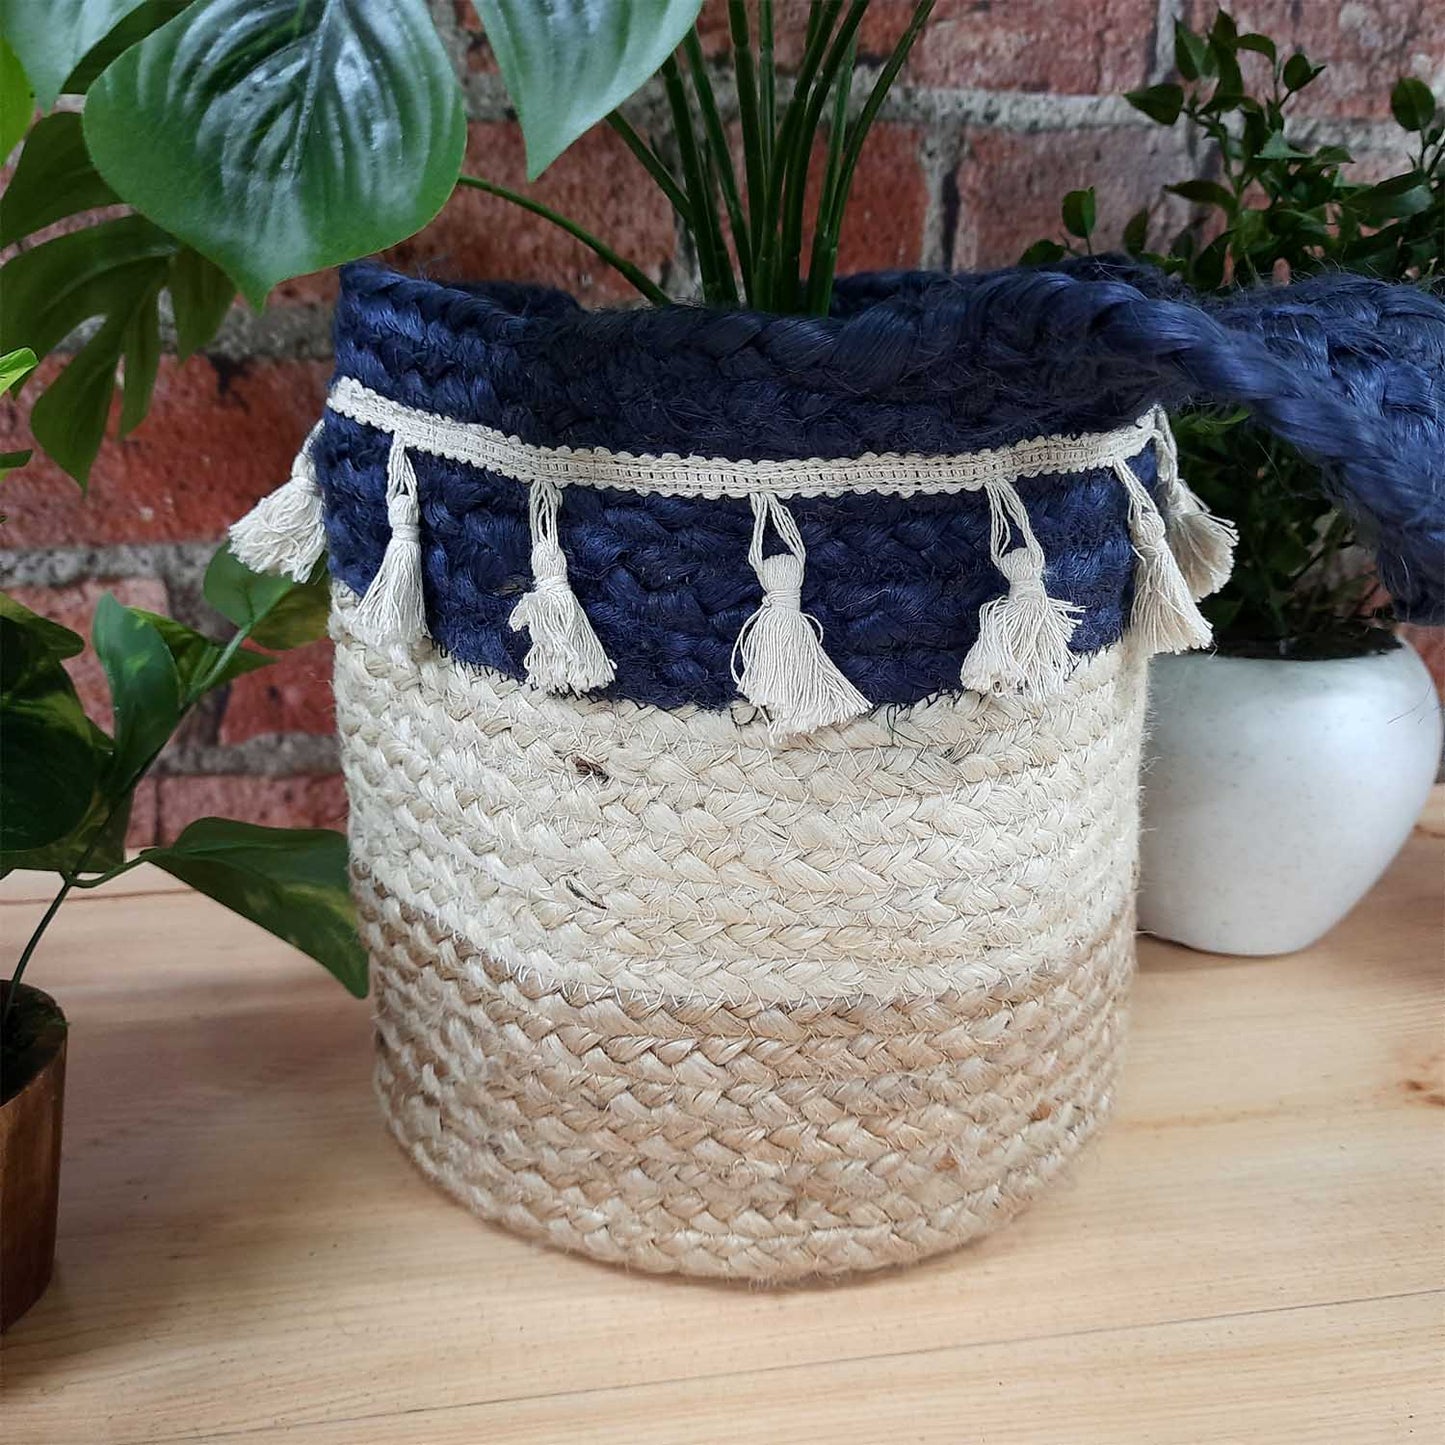 Avioni Home- Hand Braided Natural Jute Baskets With Blue And Whie Hand Decorated with Fringes Large Size- 10×10 inch (25×25 cms)